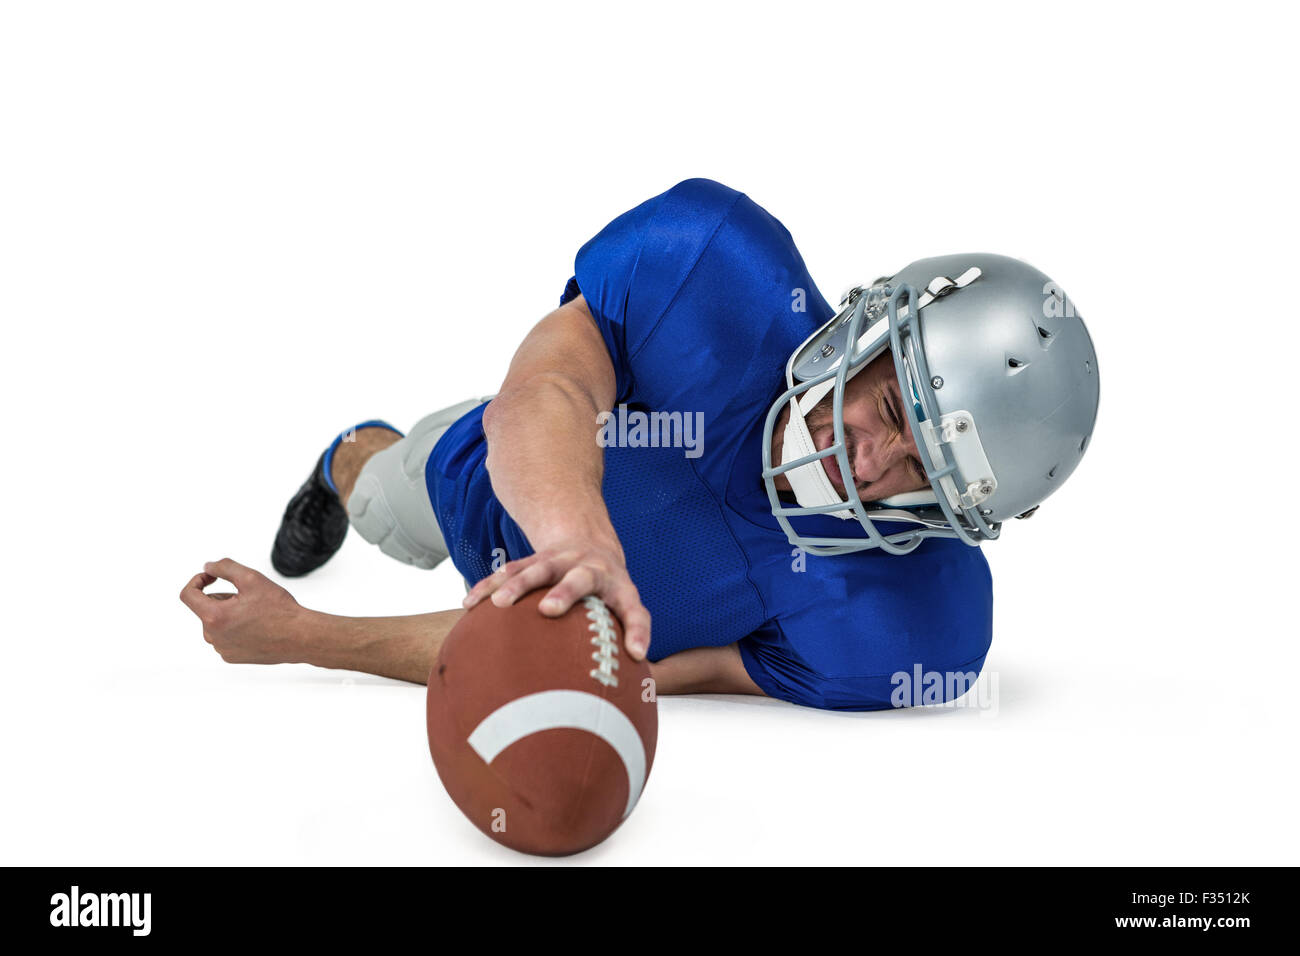 American football player struggling to catch the ball Stock Photo